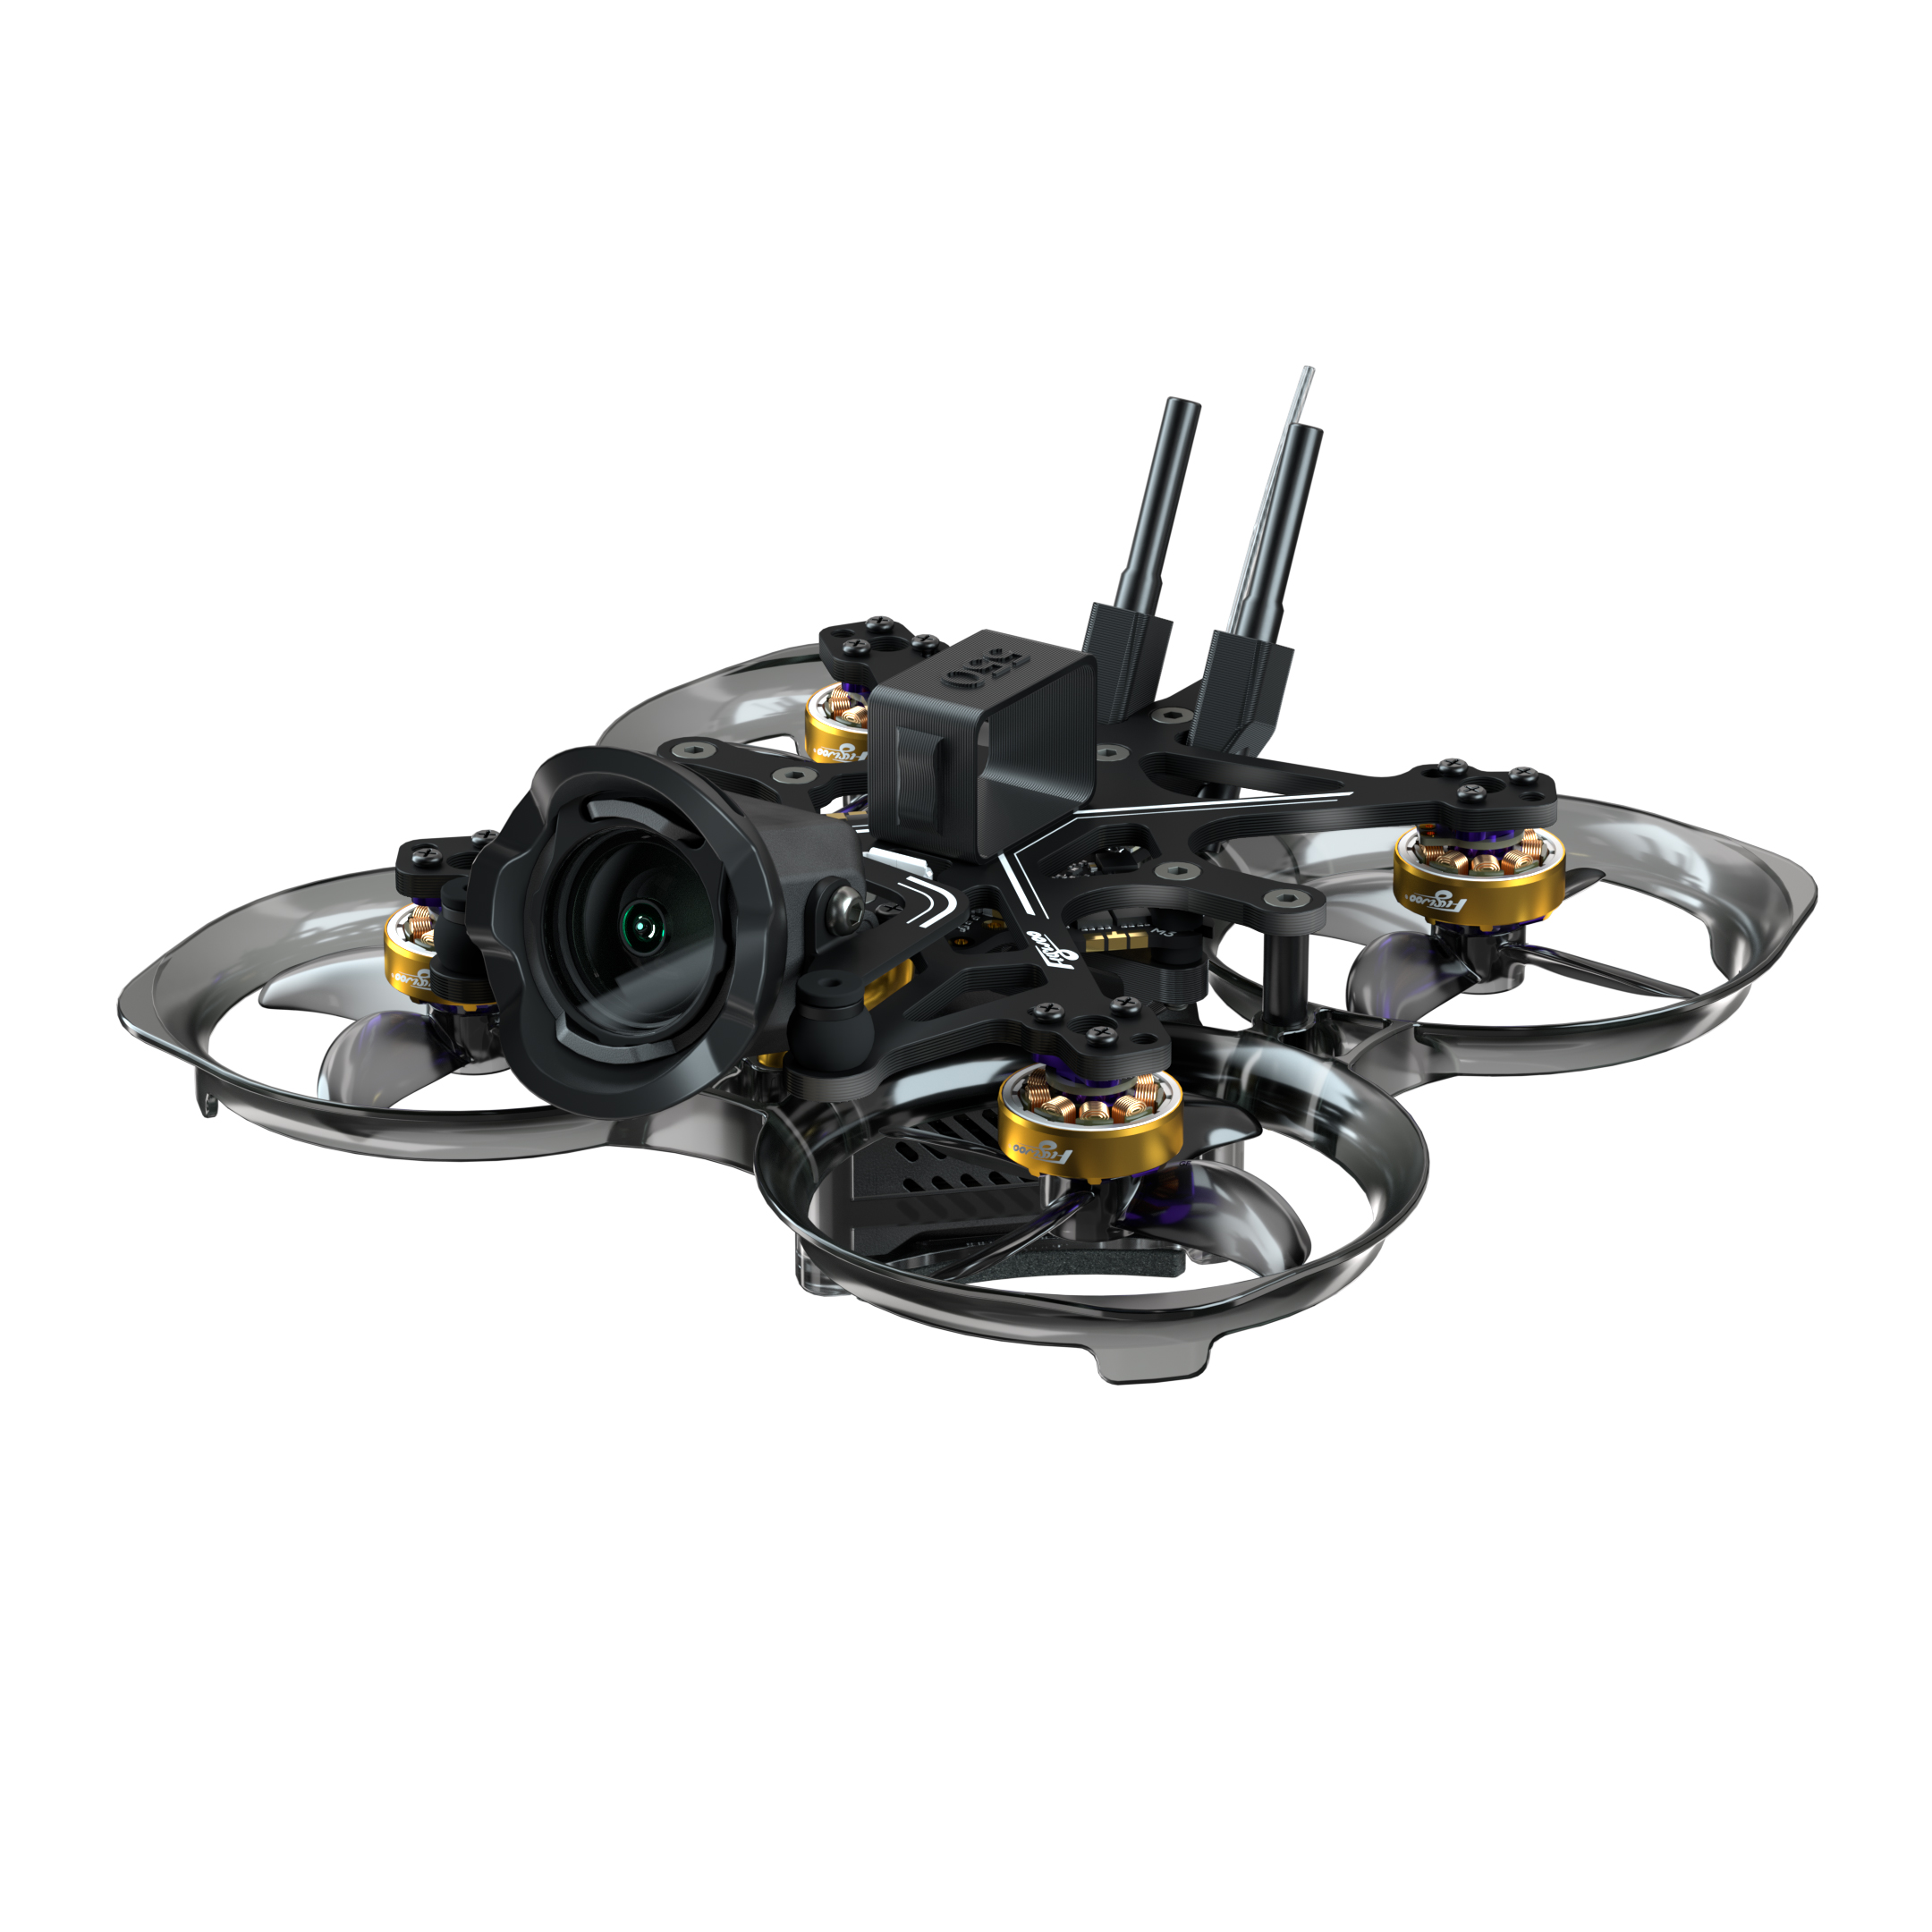 FlyLens 75 HD O3 2S Brushless Whoop FPV Drone